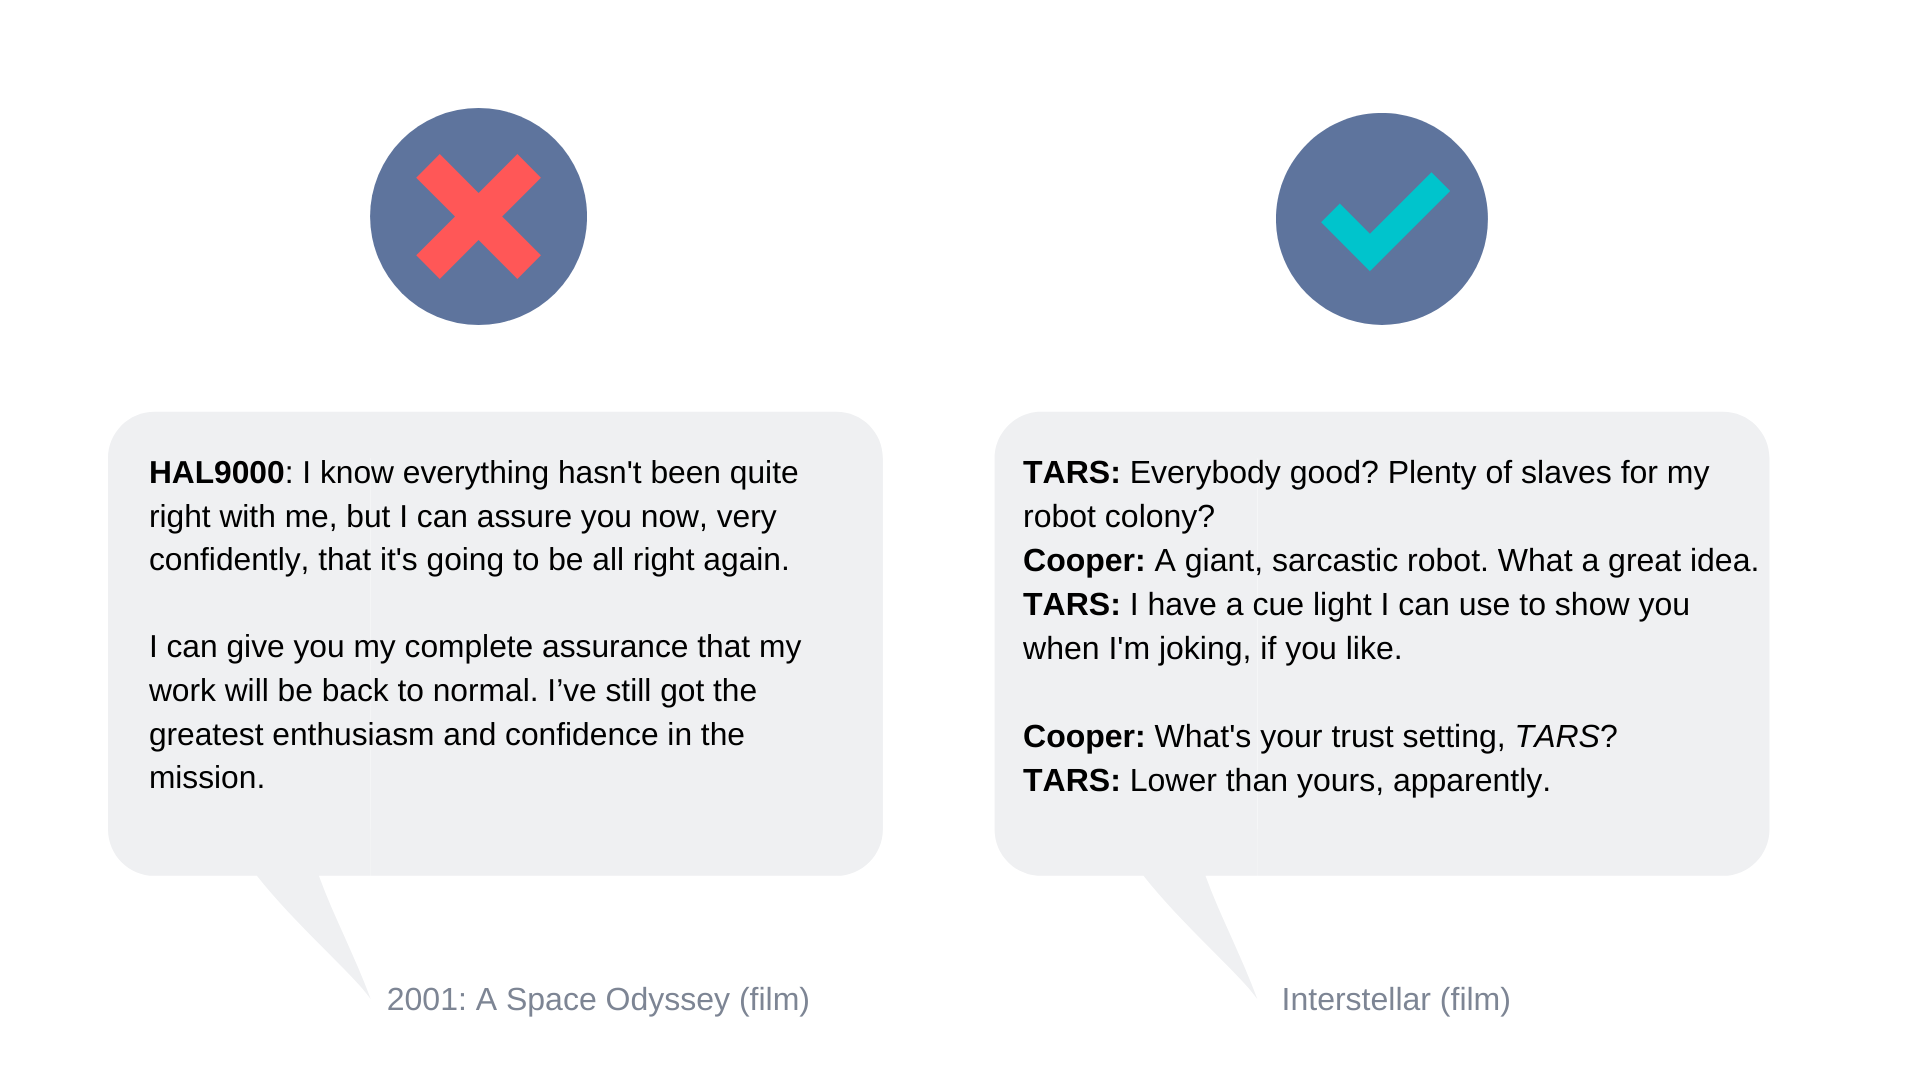 Infographic showing conversational UX application in movies